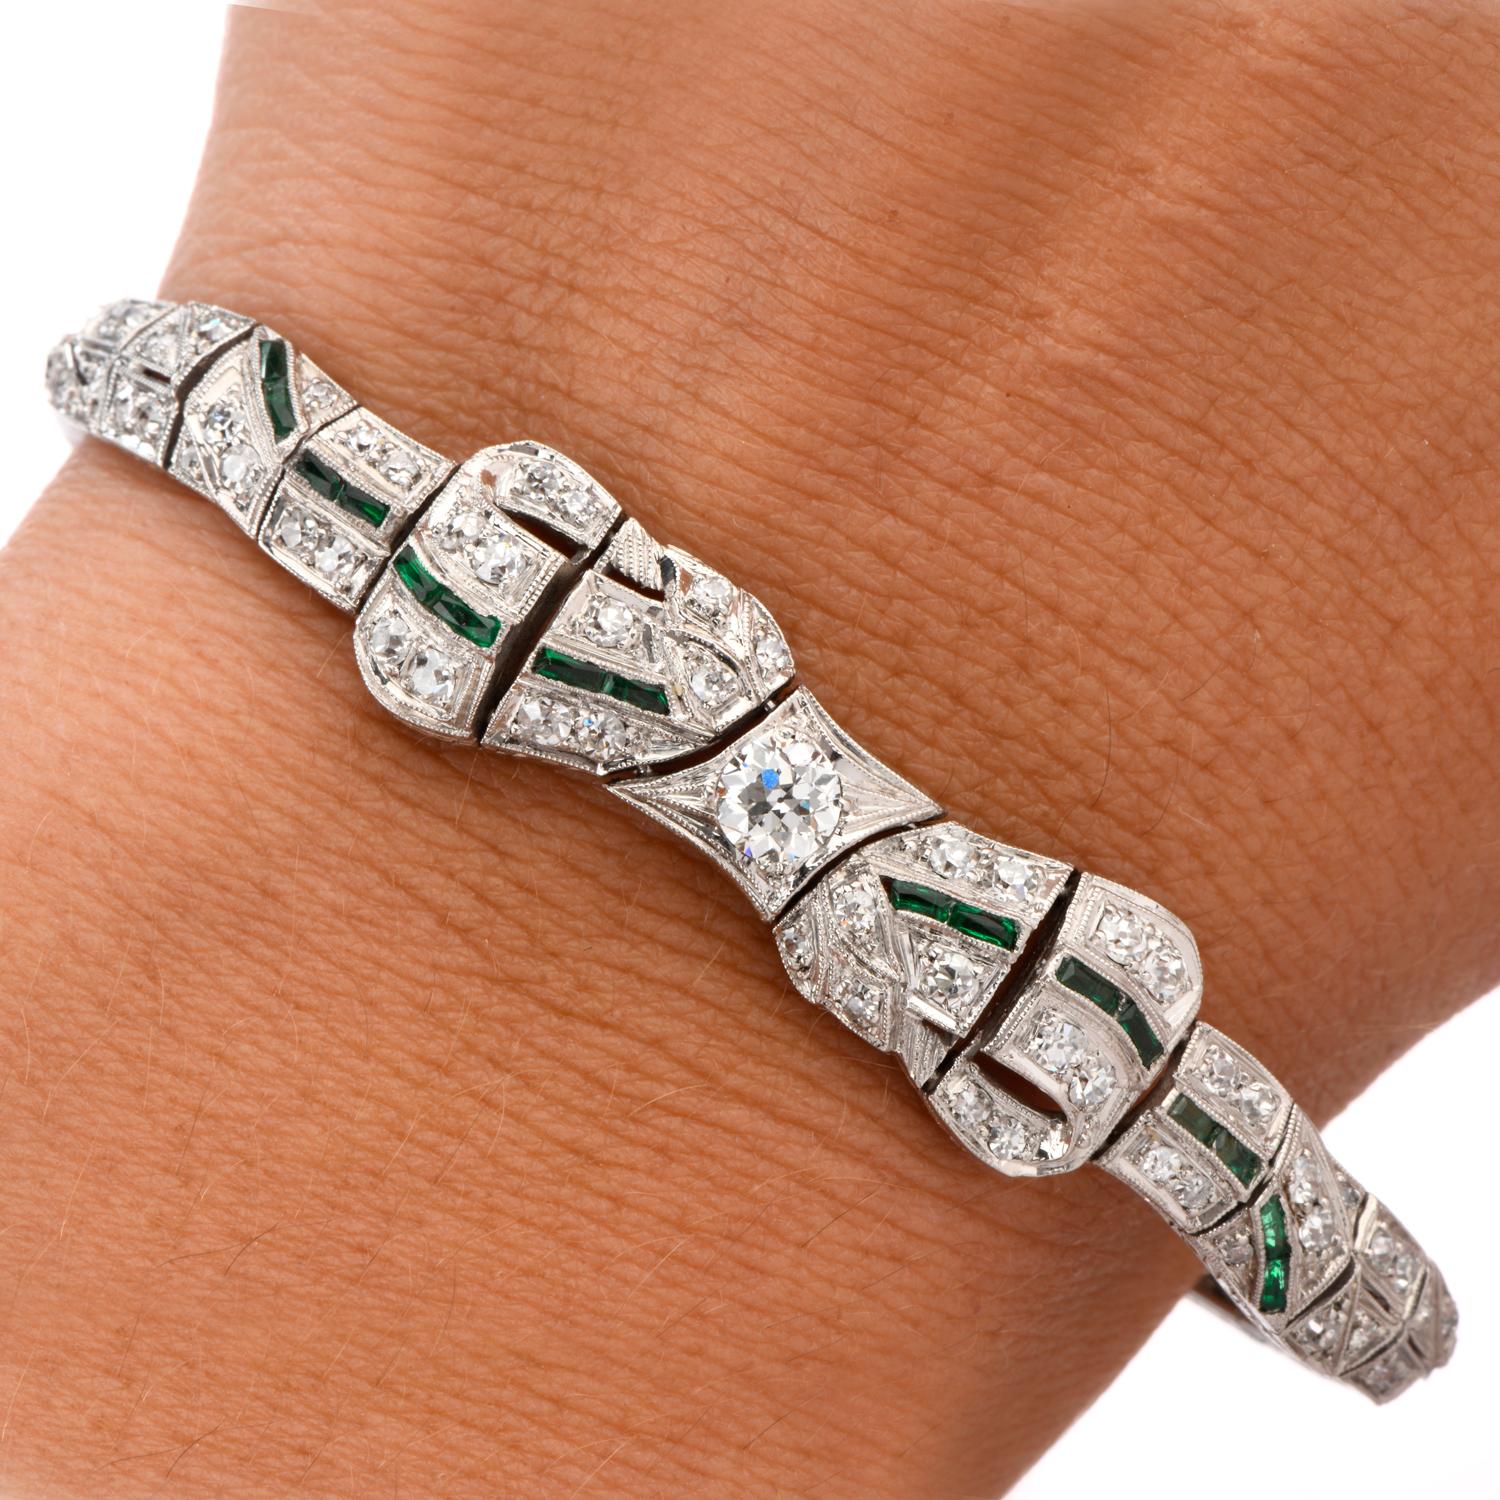 This Antique 1930's Ribbon and Bow inspired Diamond and Emerald Bracelet was crafted in luxurous Platinum. 
The bracelet drips in Diamonds from one end of the Ribbon to the other featuring an Emerald thread through the center.  This can be both the